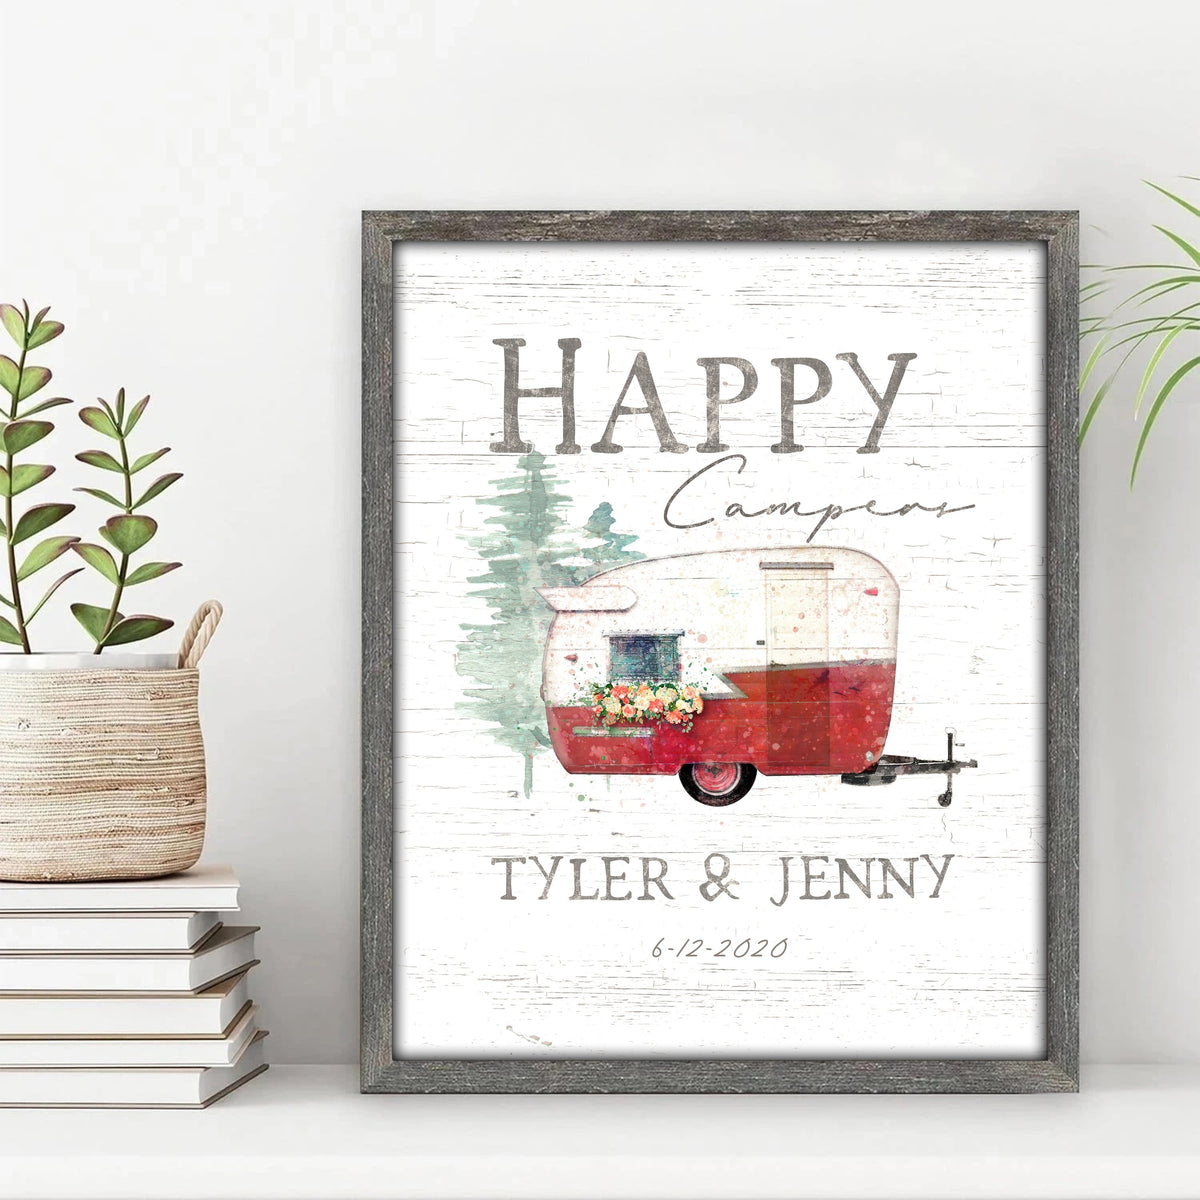 Happy Campers personalized gift from Personal Prints